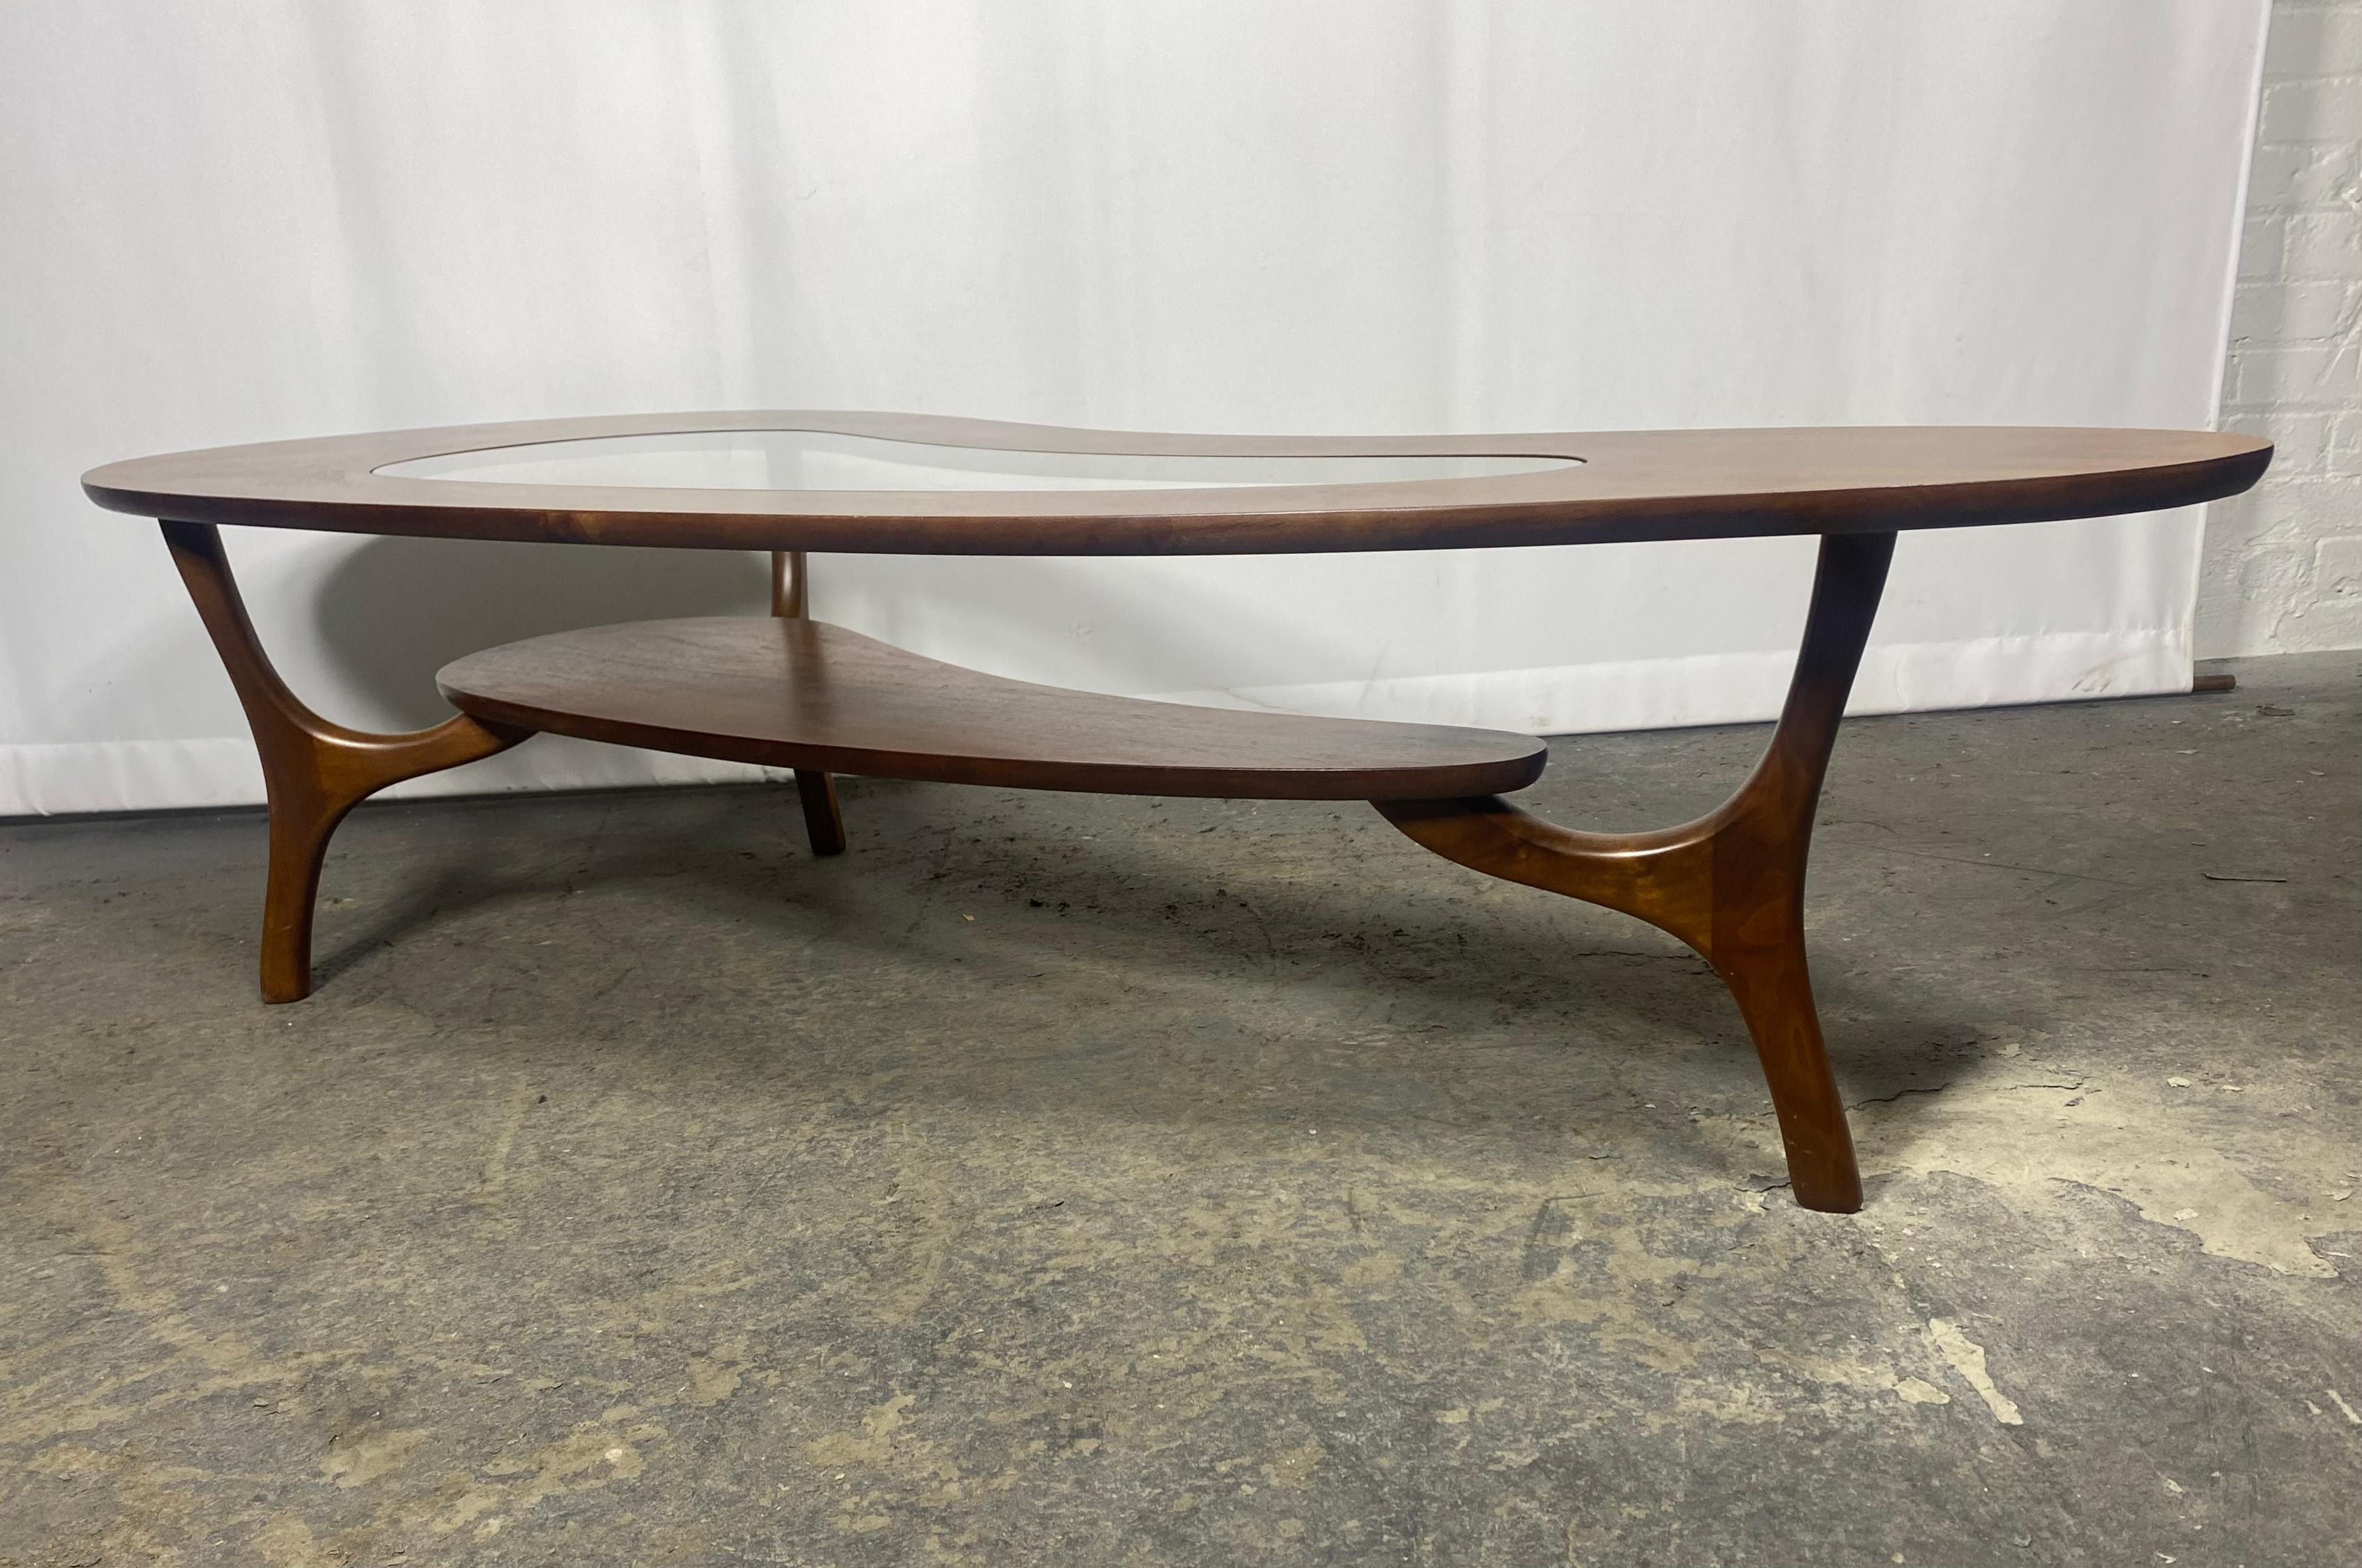 c.1960 kidney shaped, 2 tiered coffee table with sculptural legs & glass insert  1